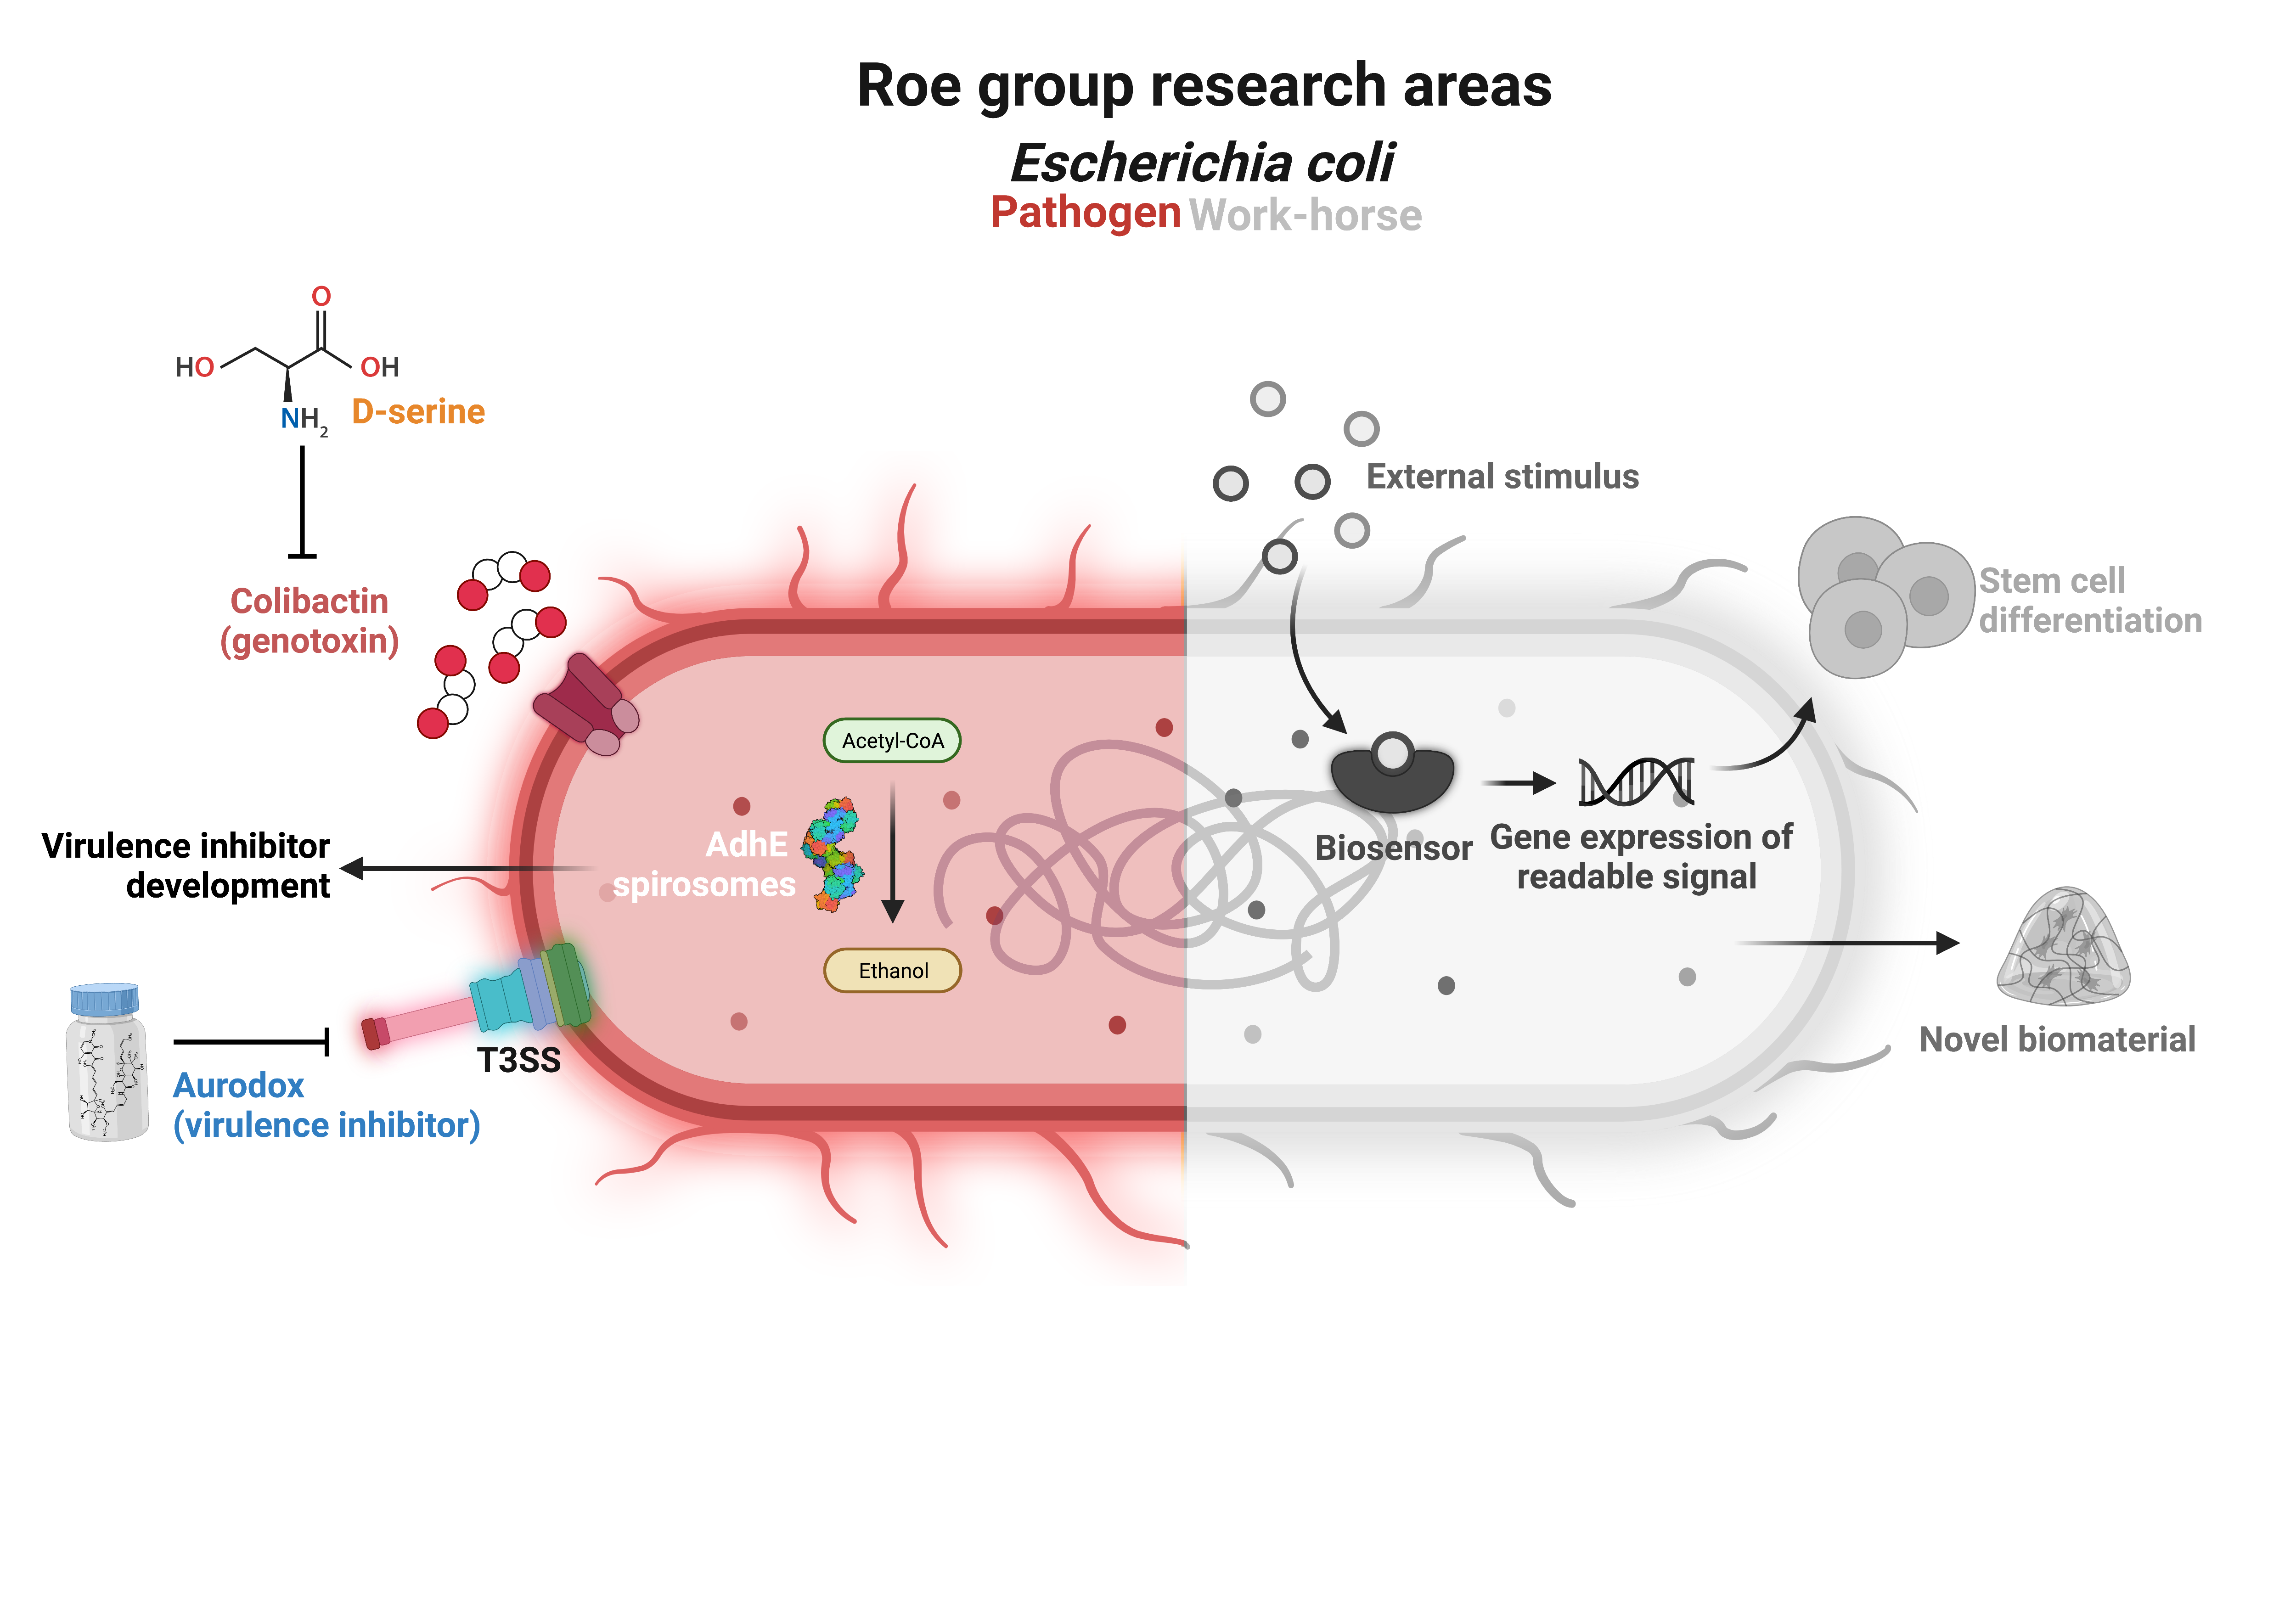 Image showing the research areas of the Roe group that focus on E.coli as a pathogen